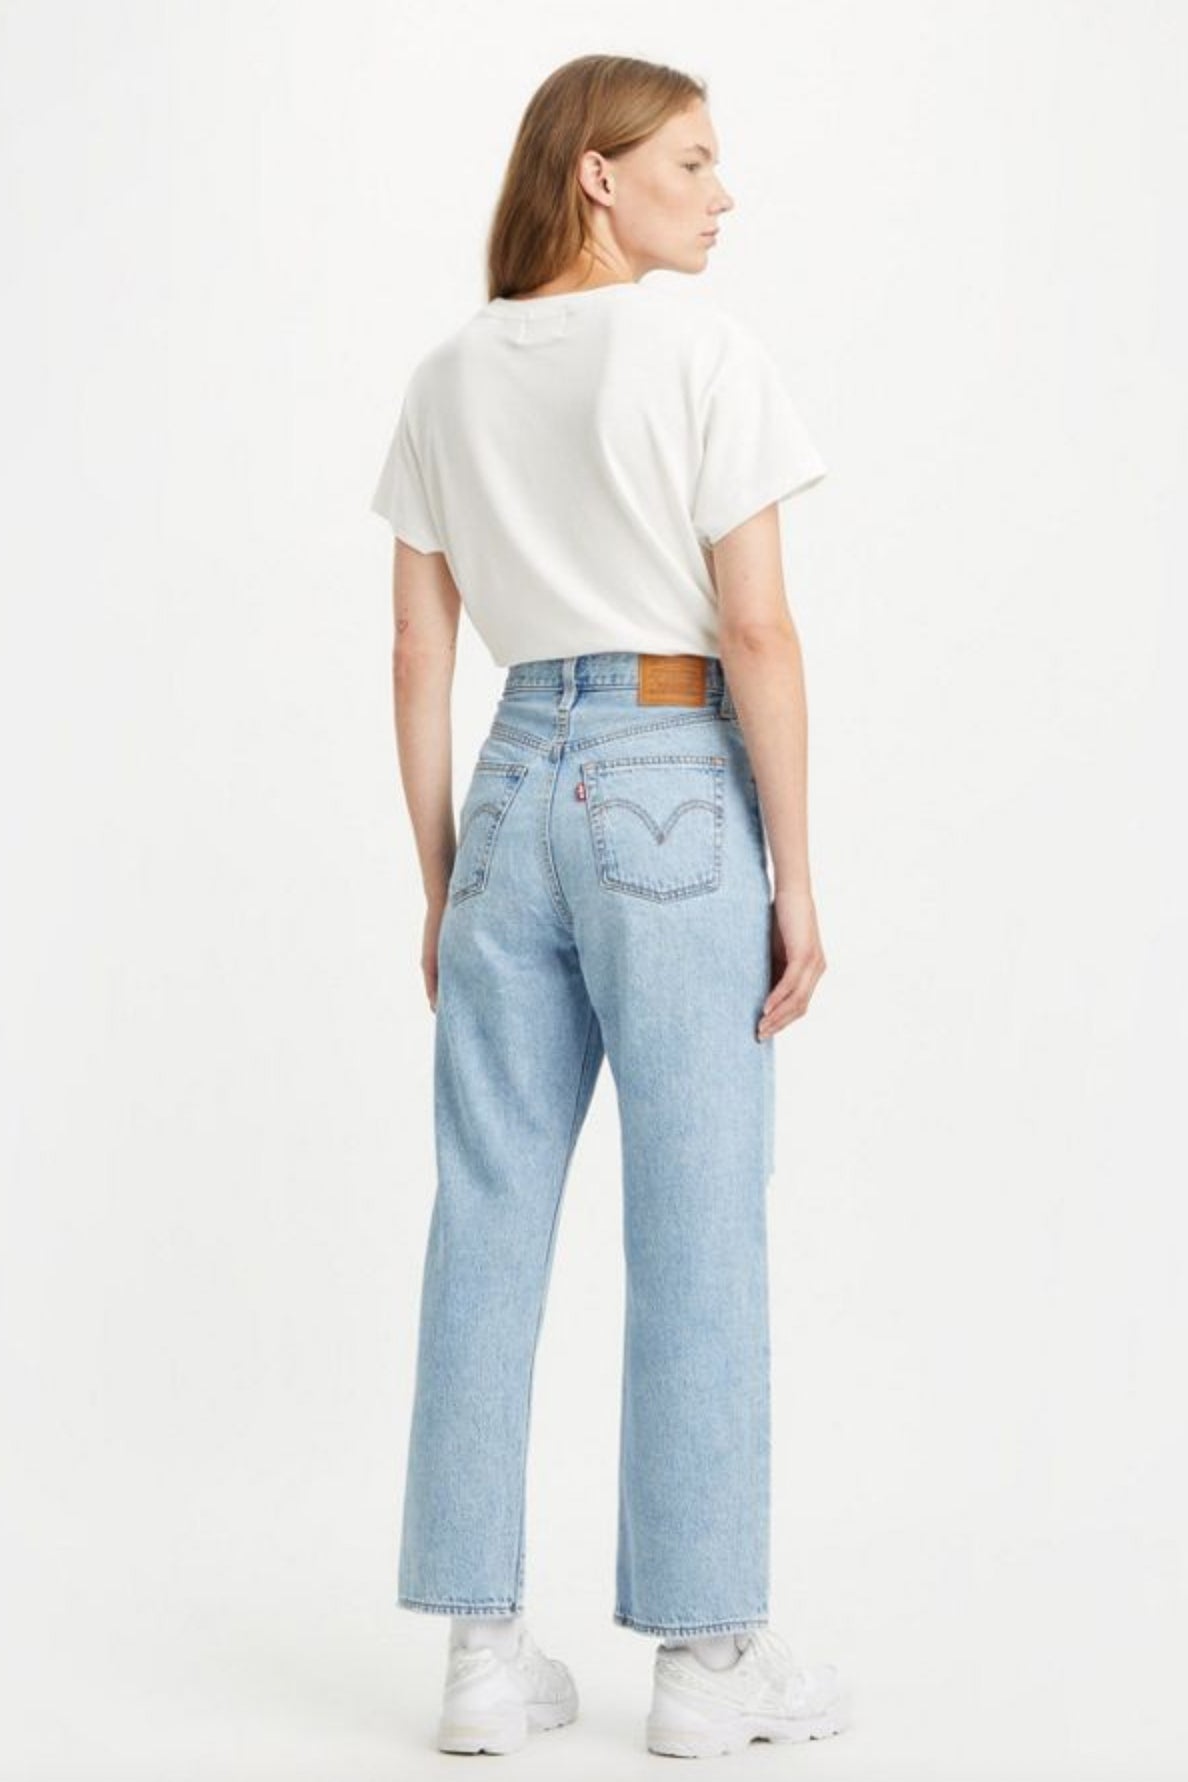 Levi's Ribcage Hang Up Women's Jeans